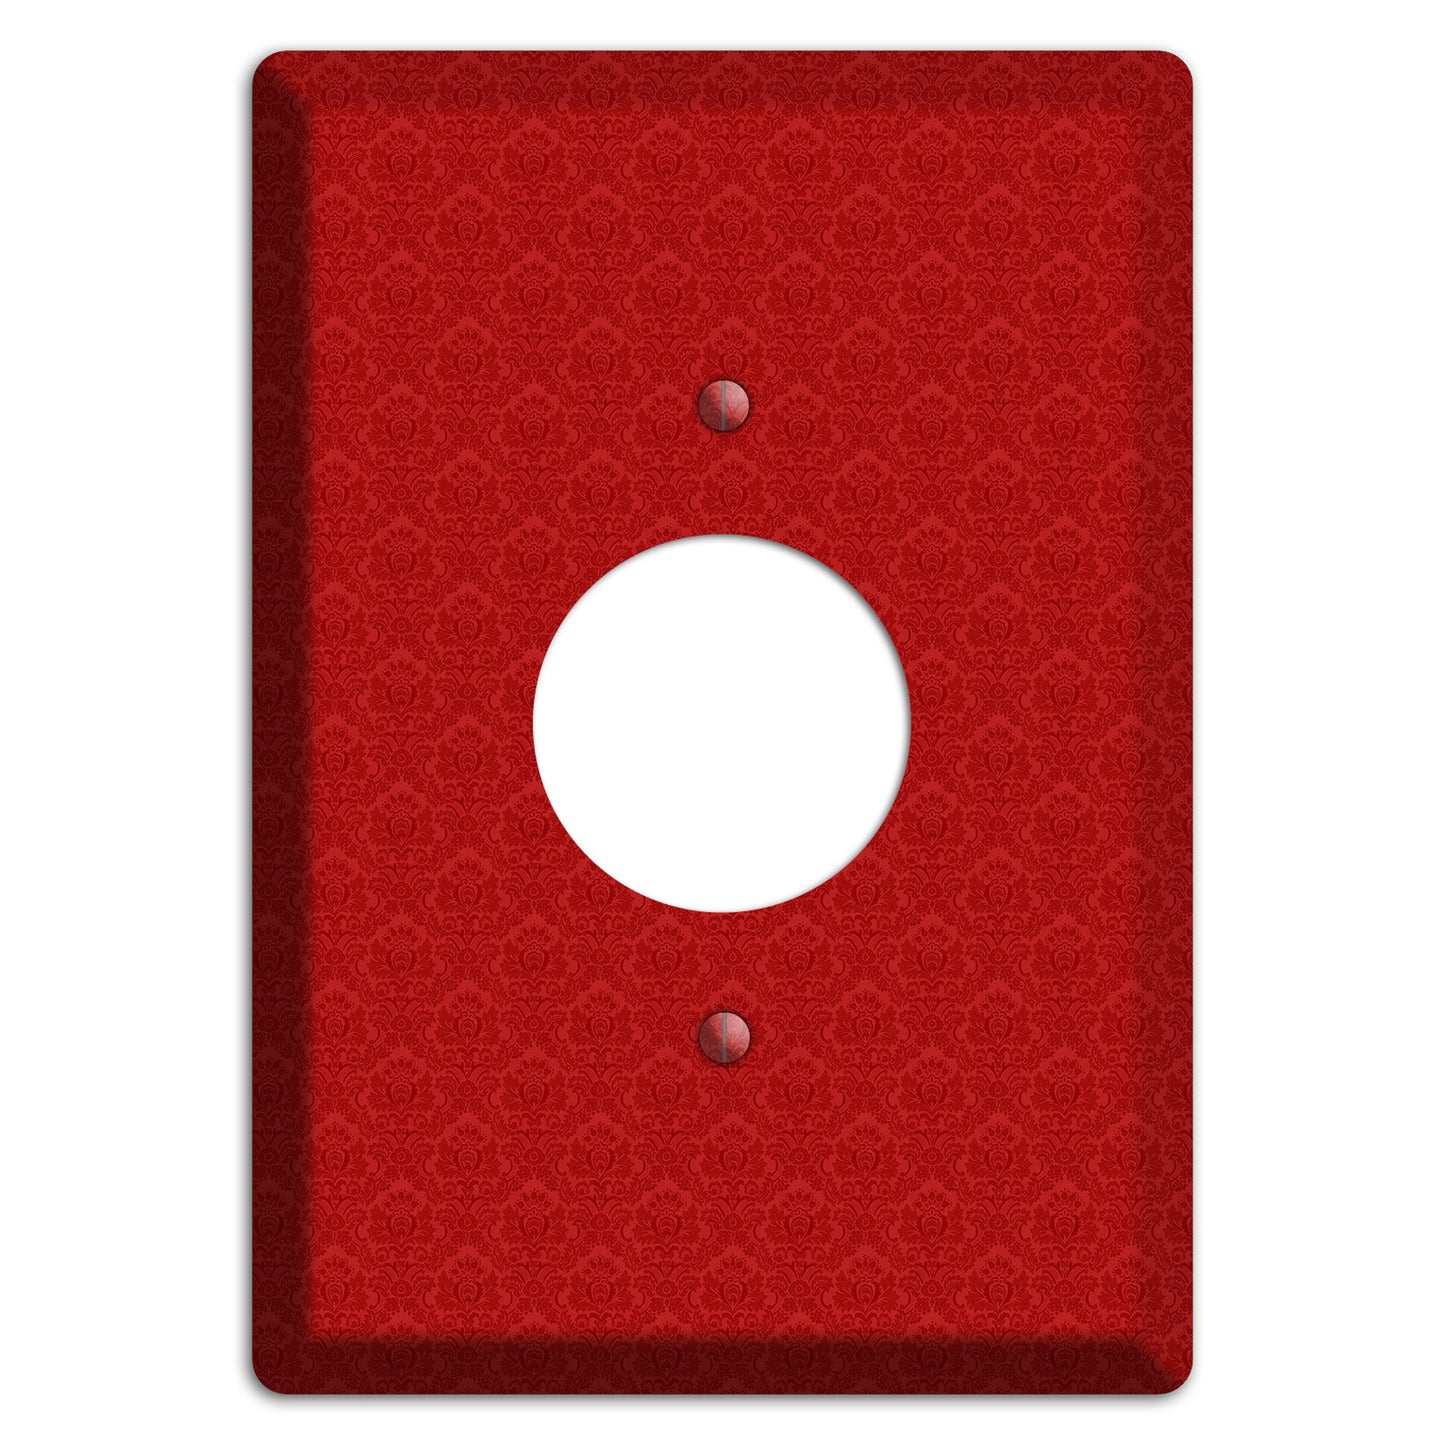 Red Cartouche Single Receptacle Wallplate